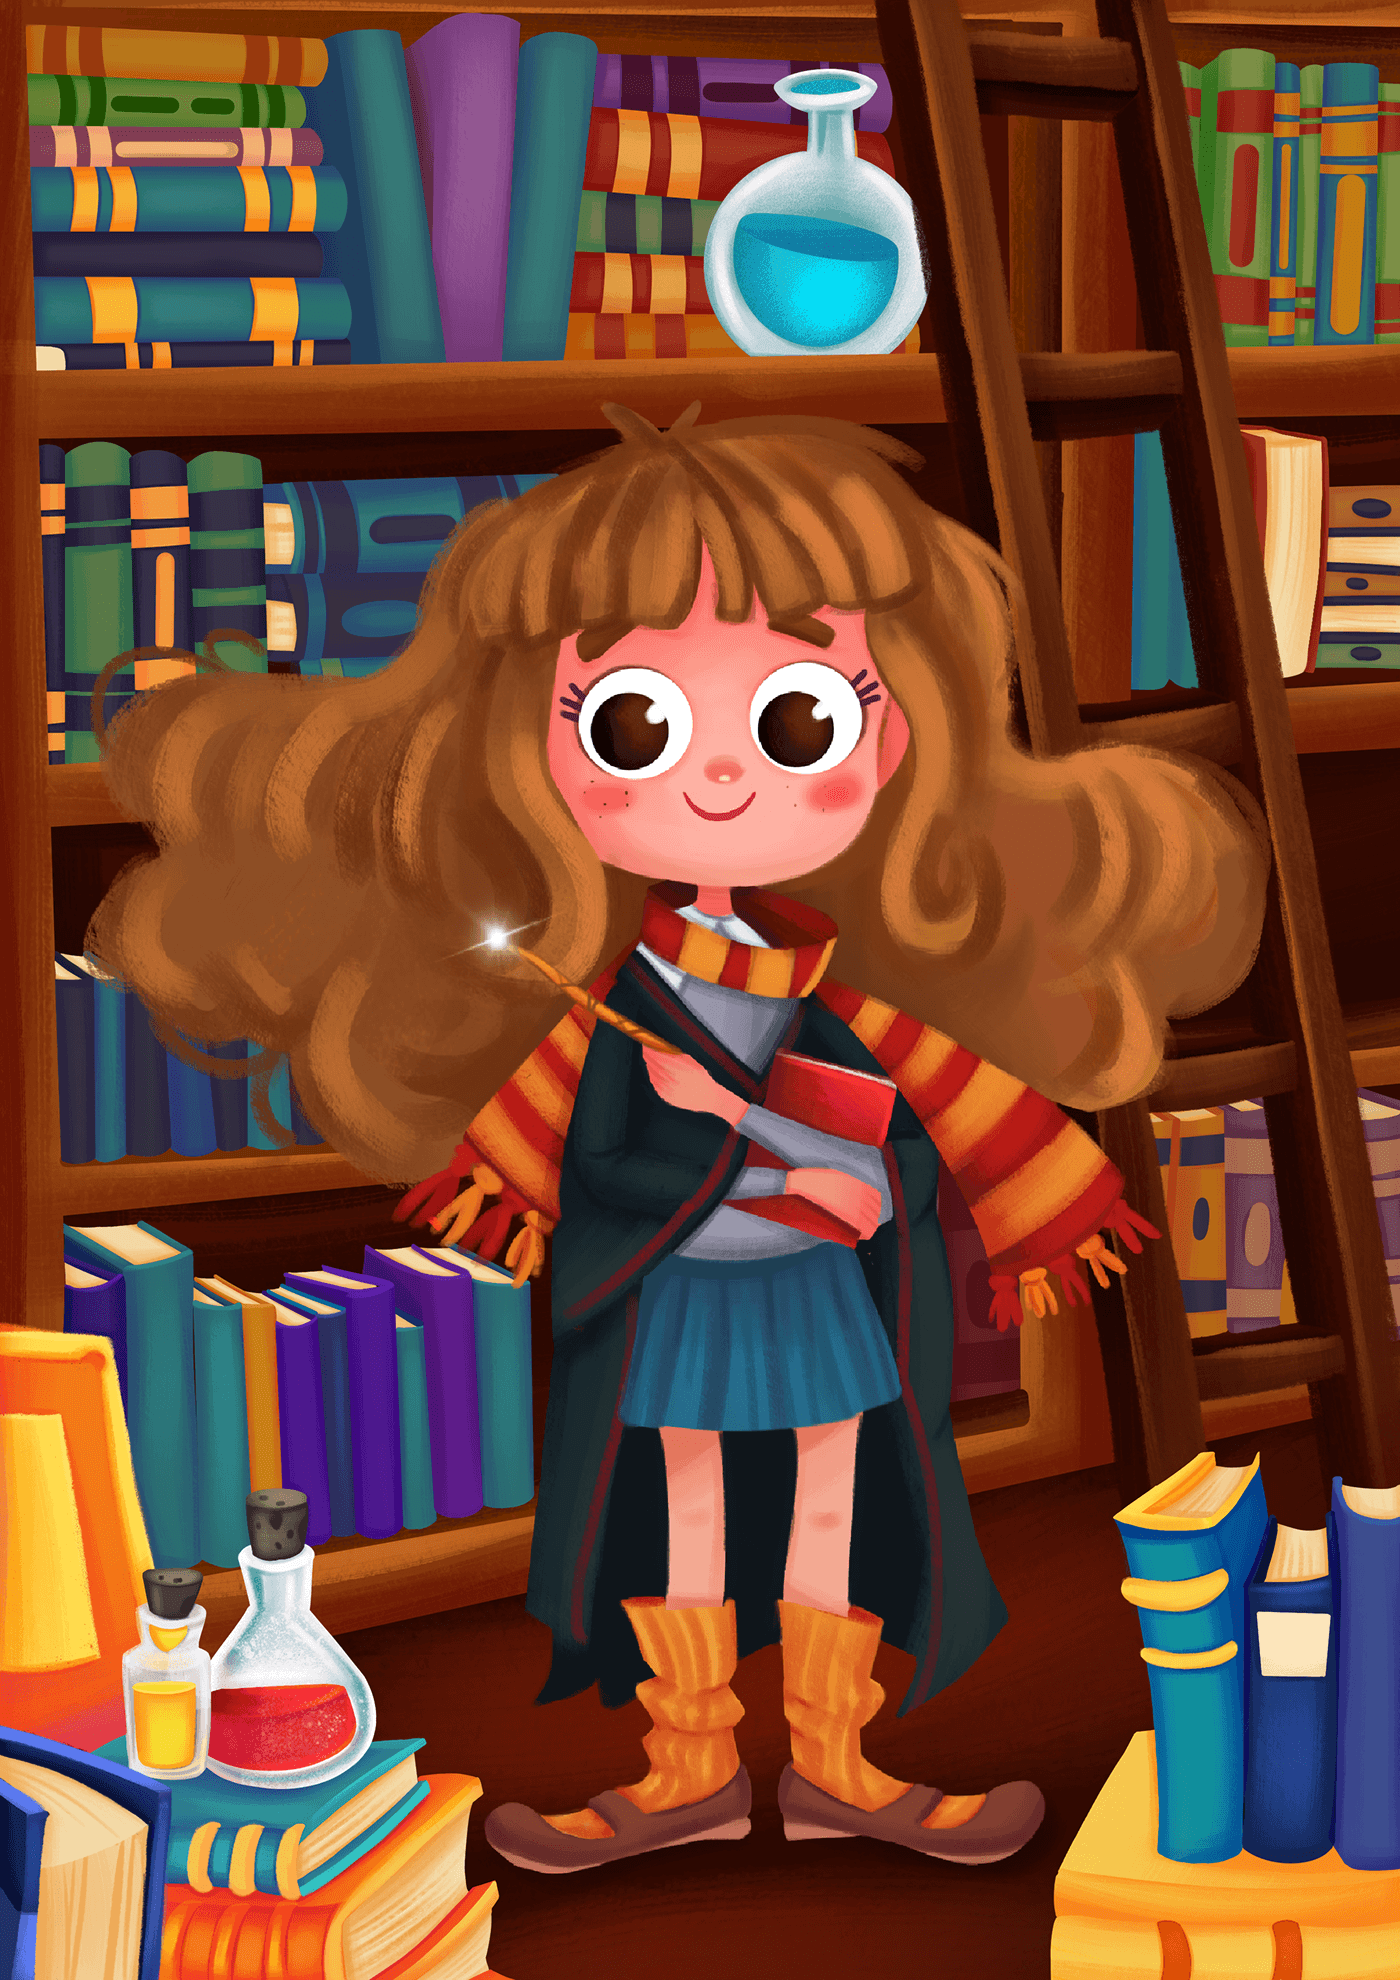 Hermione Granger in the library